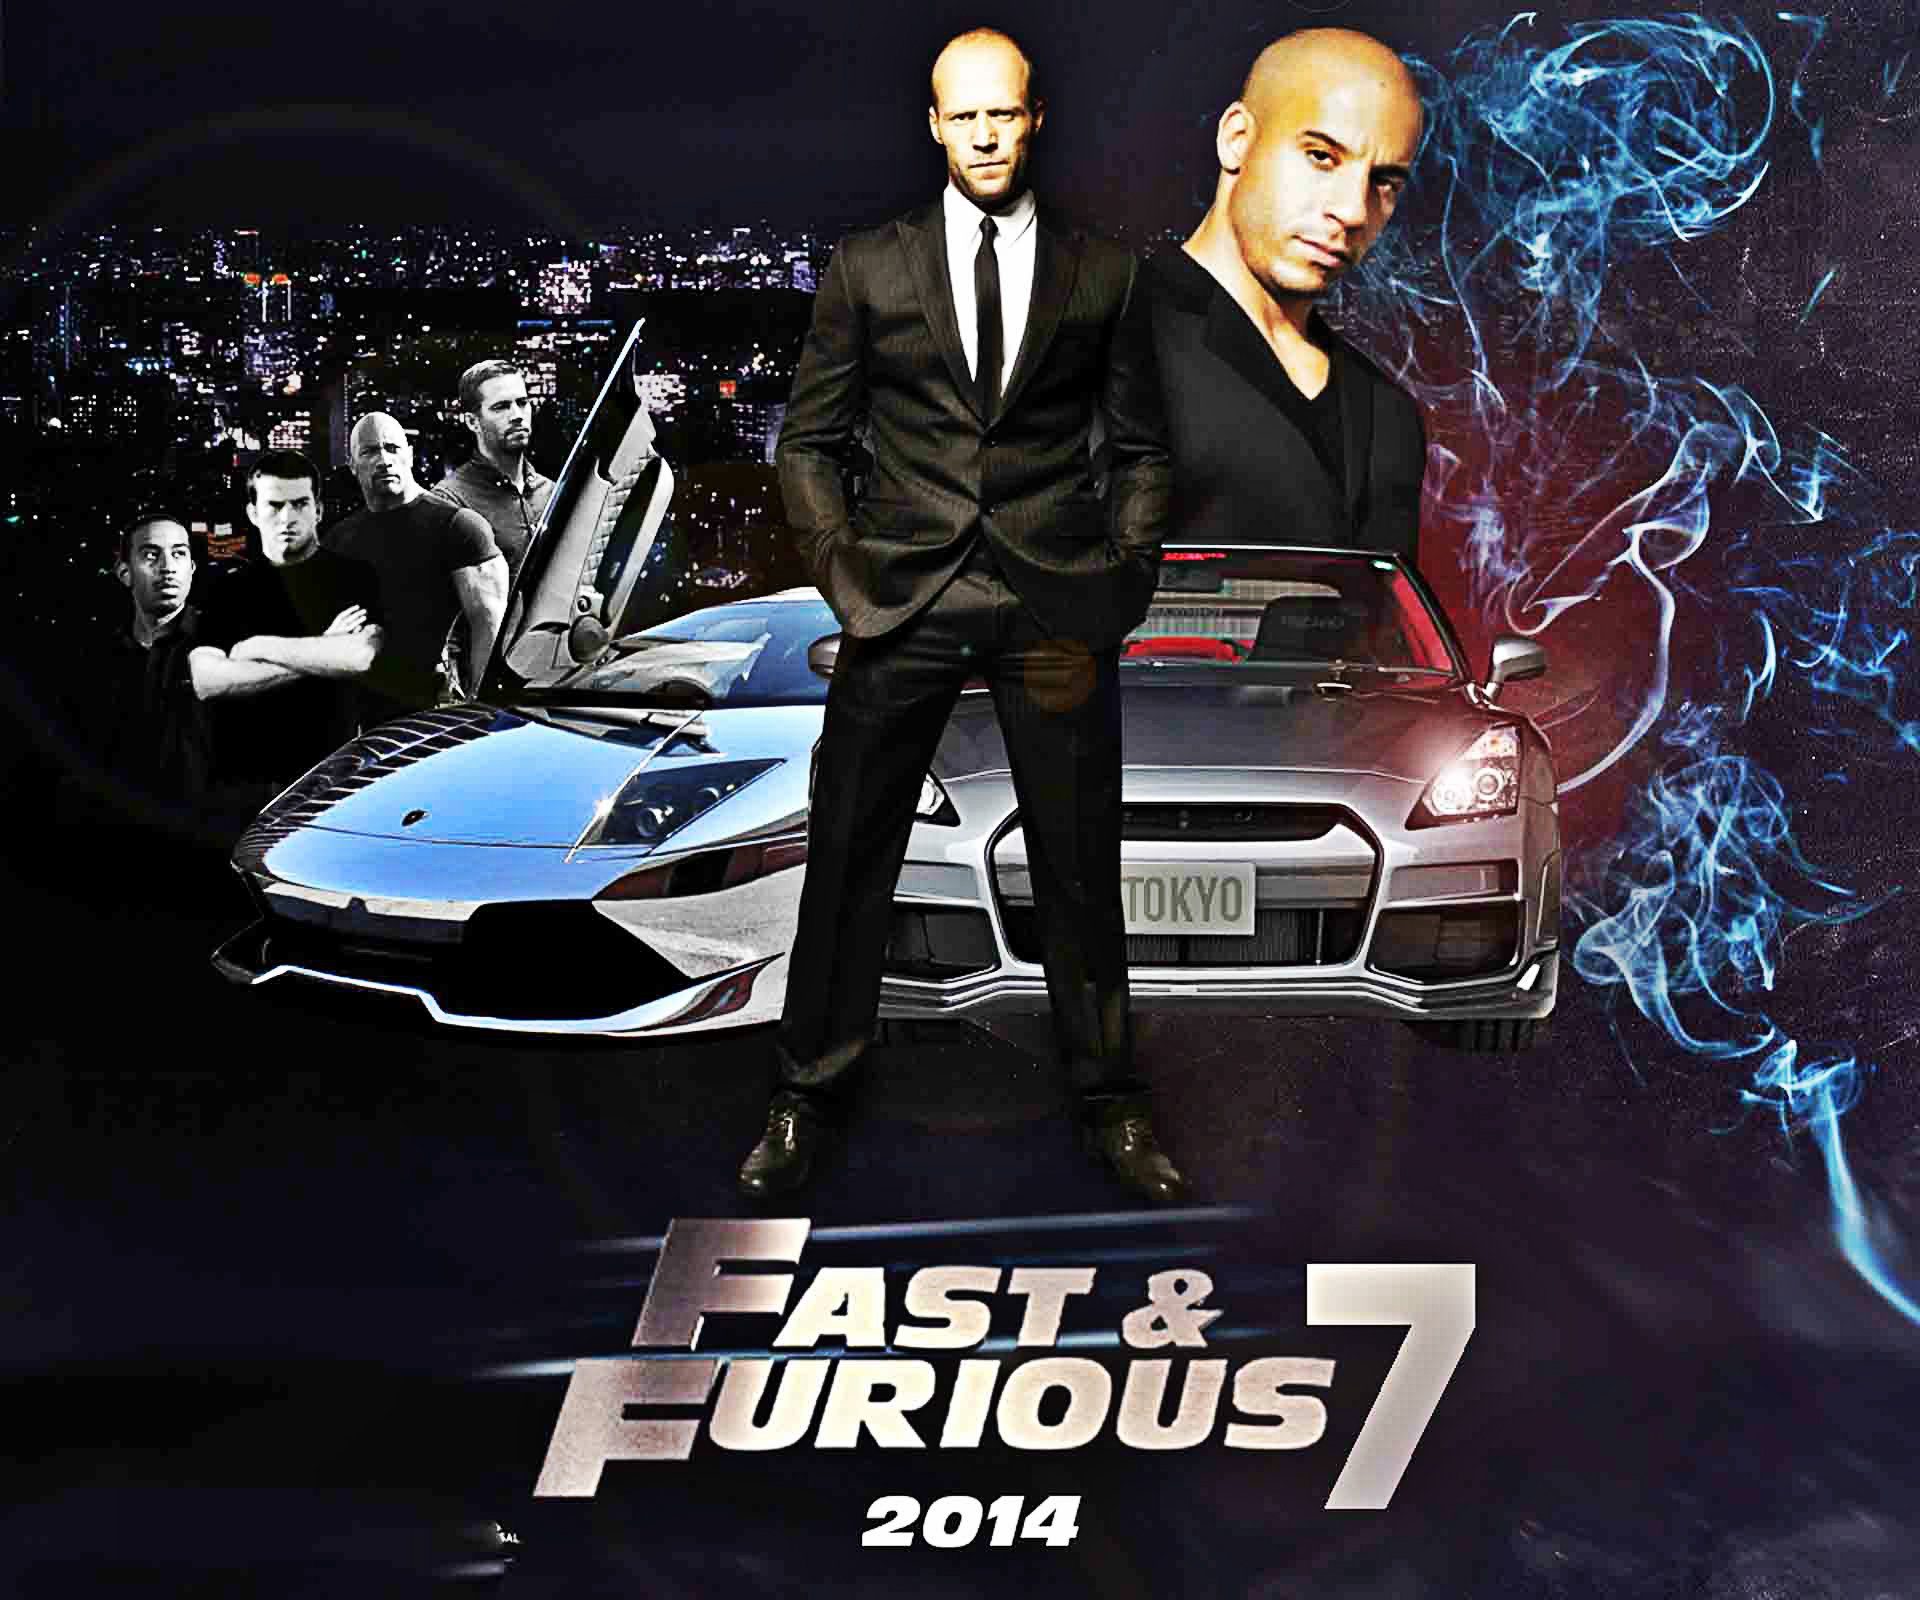 furious 7 download free